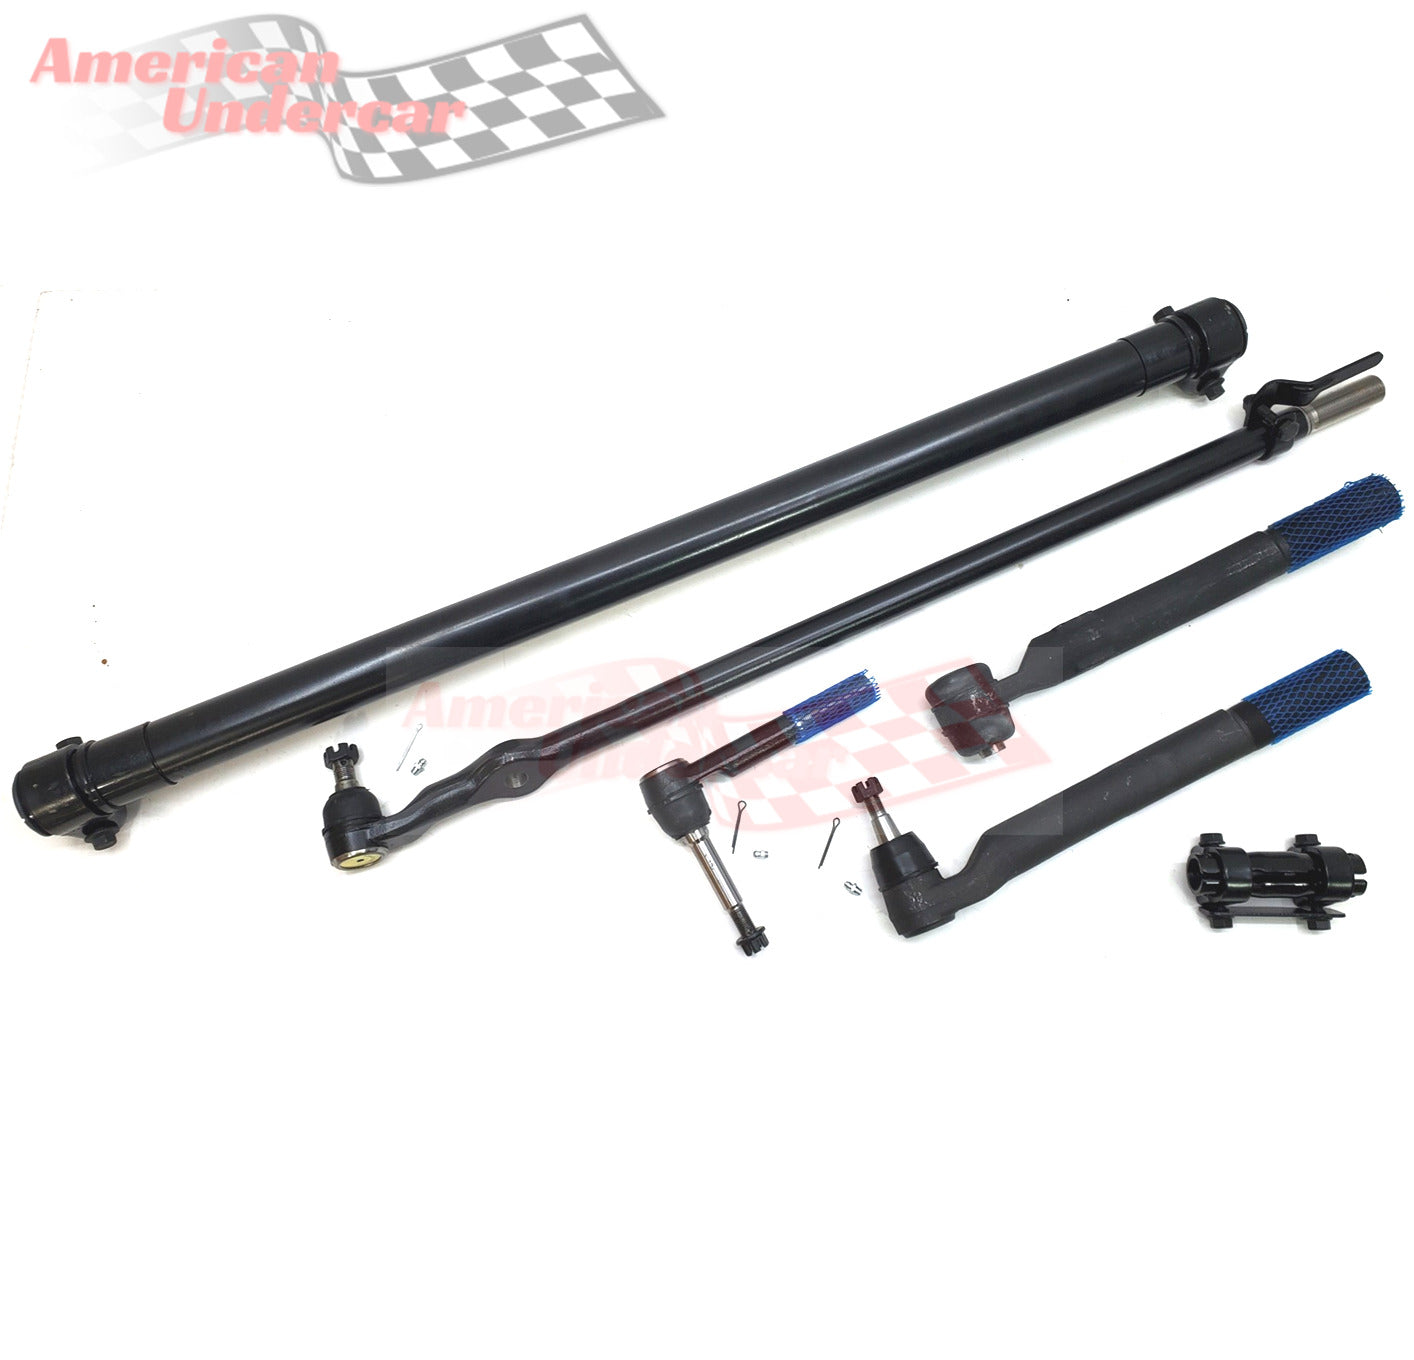 Lifetime Steering and Suspension Kit for 2011-2016 Ford F450 Super Duty 4x4